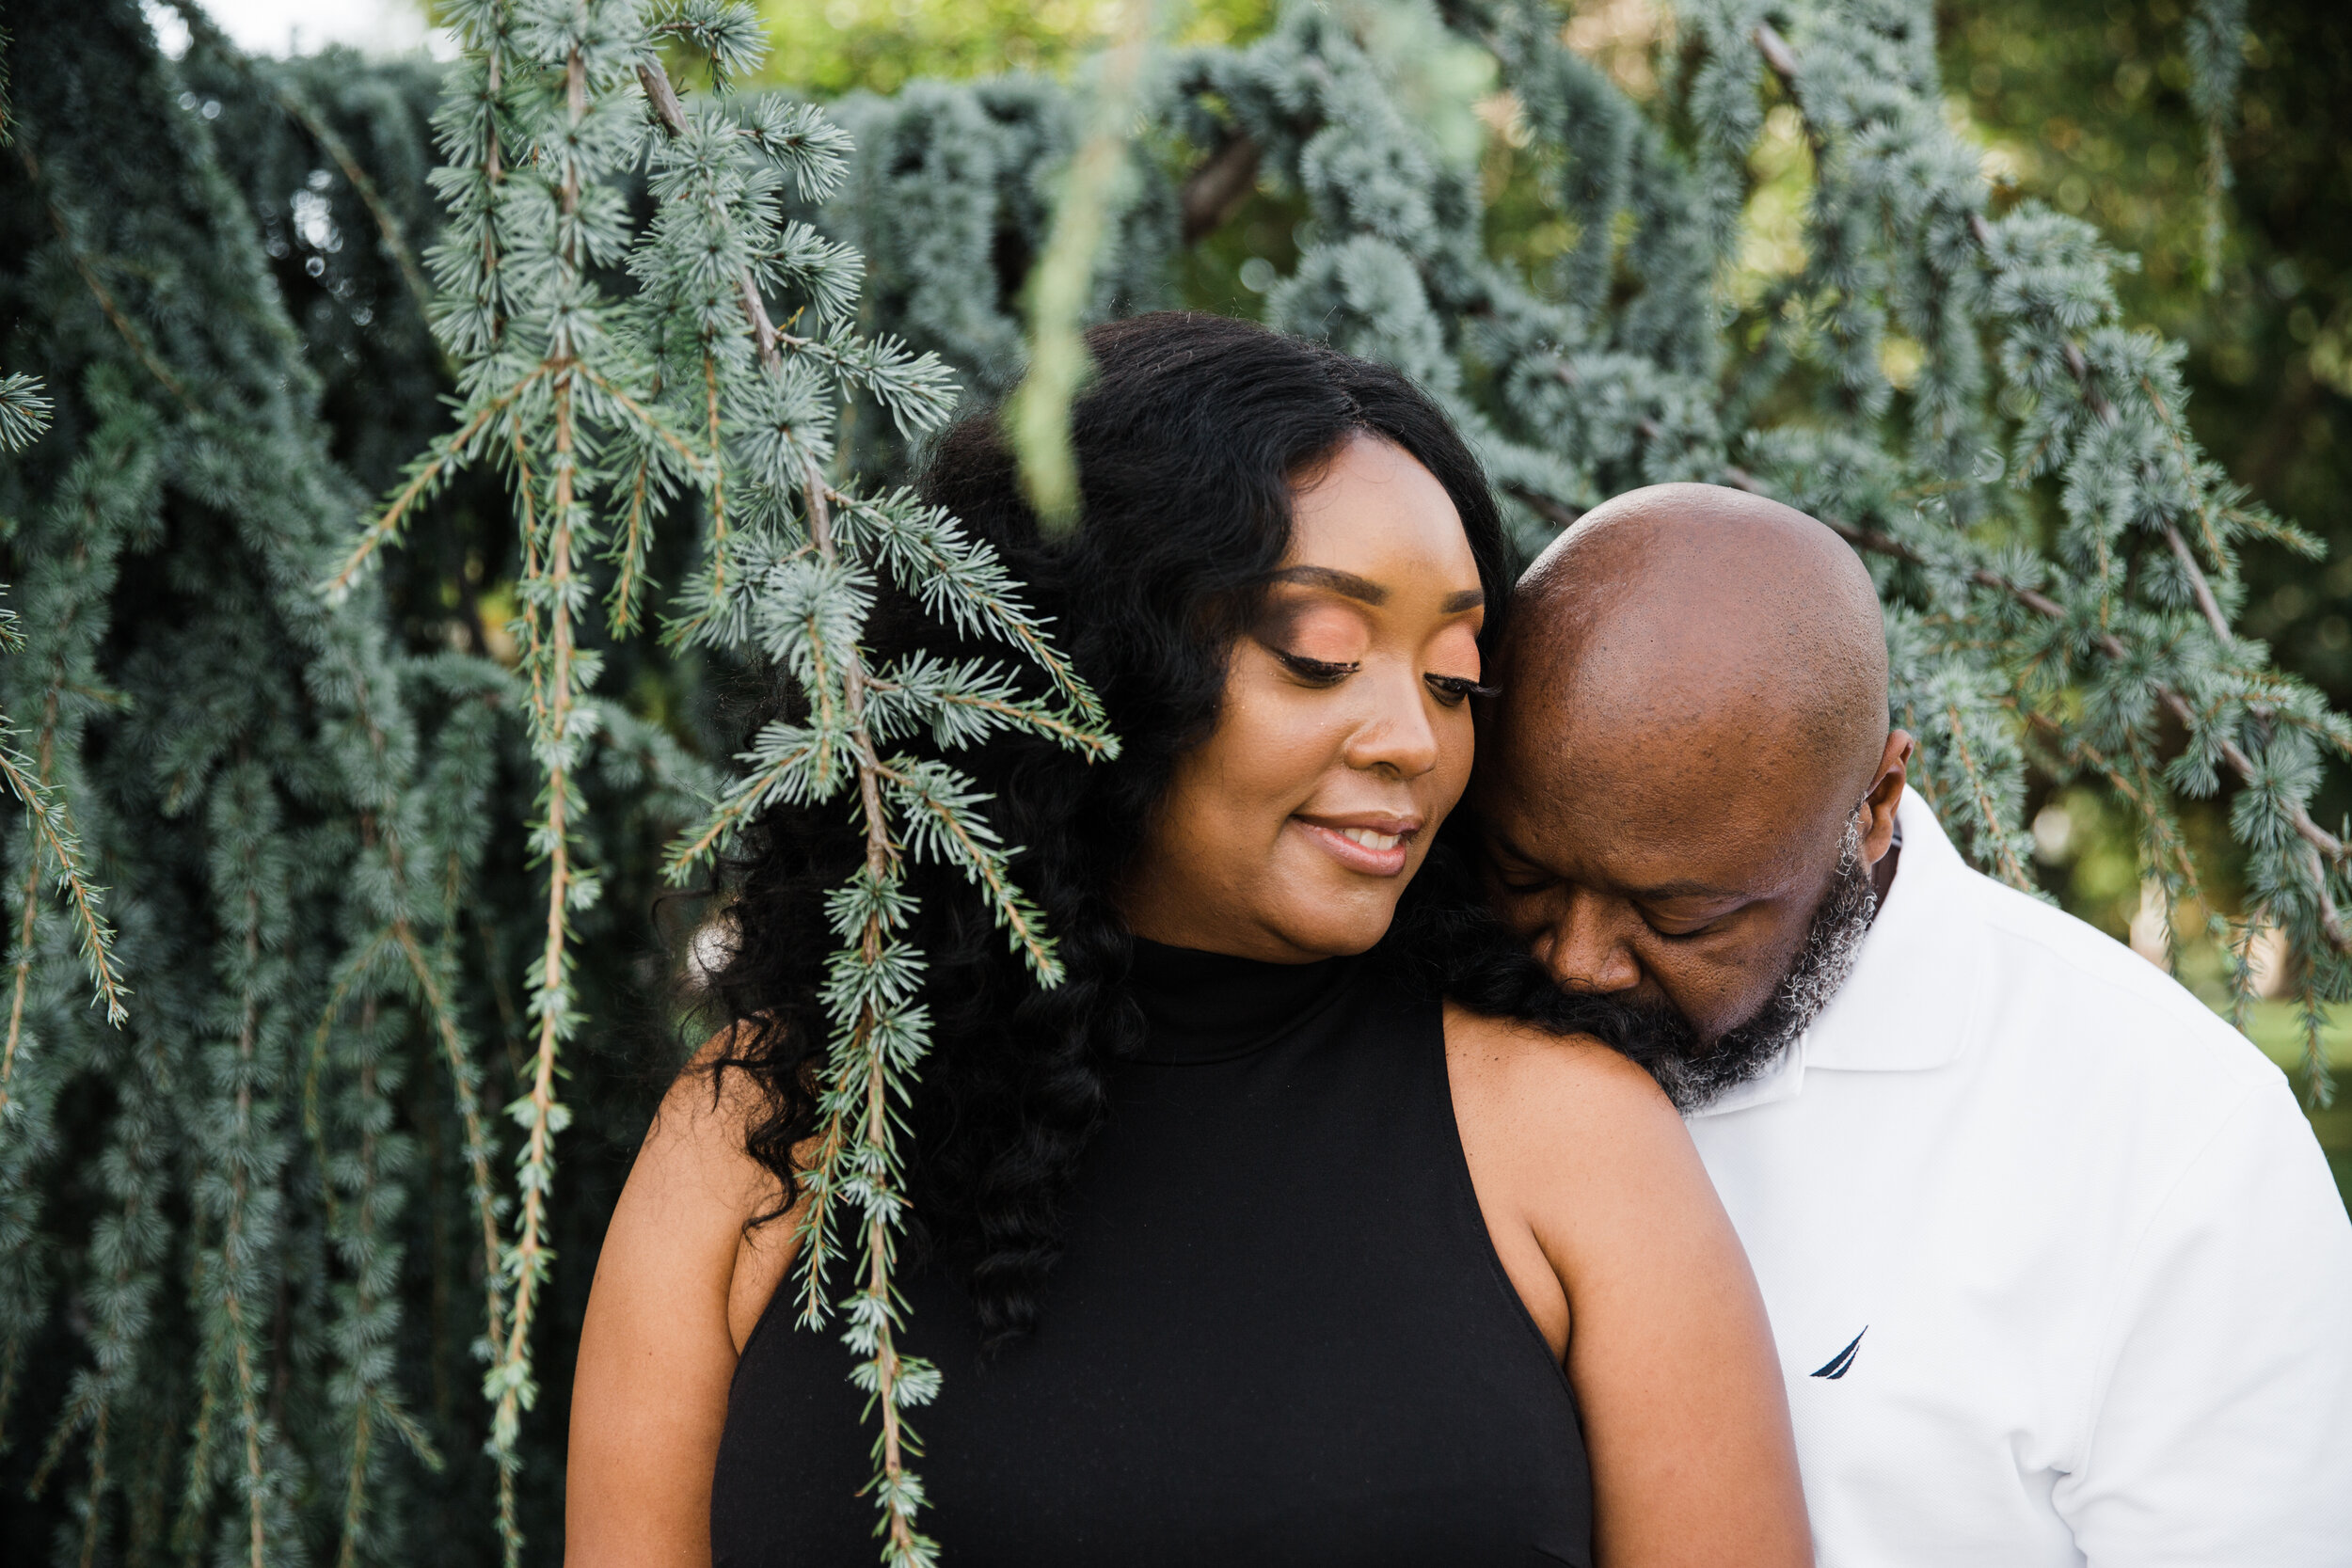 Patterson Park Engagement Session with Black Photographers Megapixels media in Baltimore Maryland (11 of 32).jpg